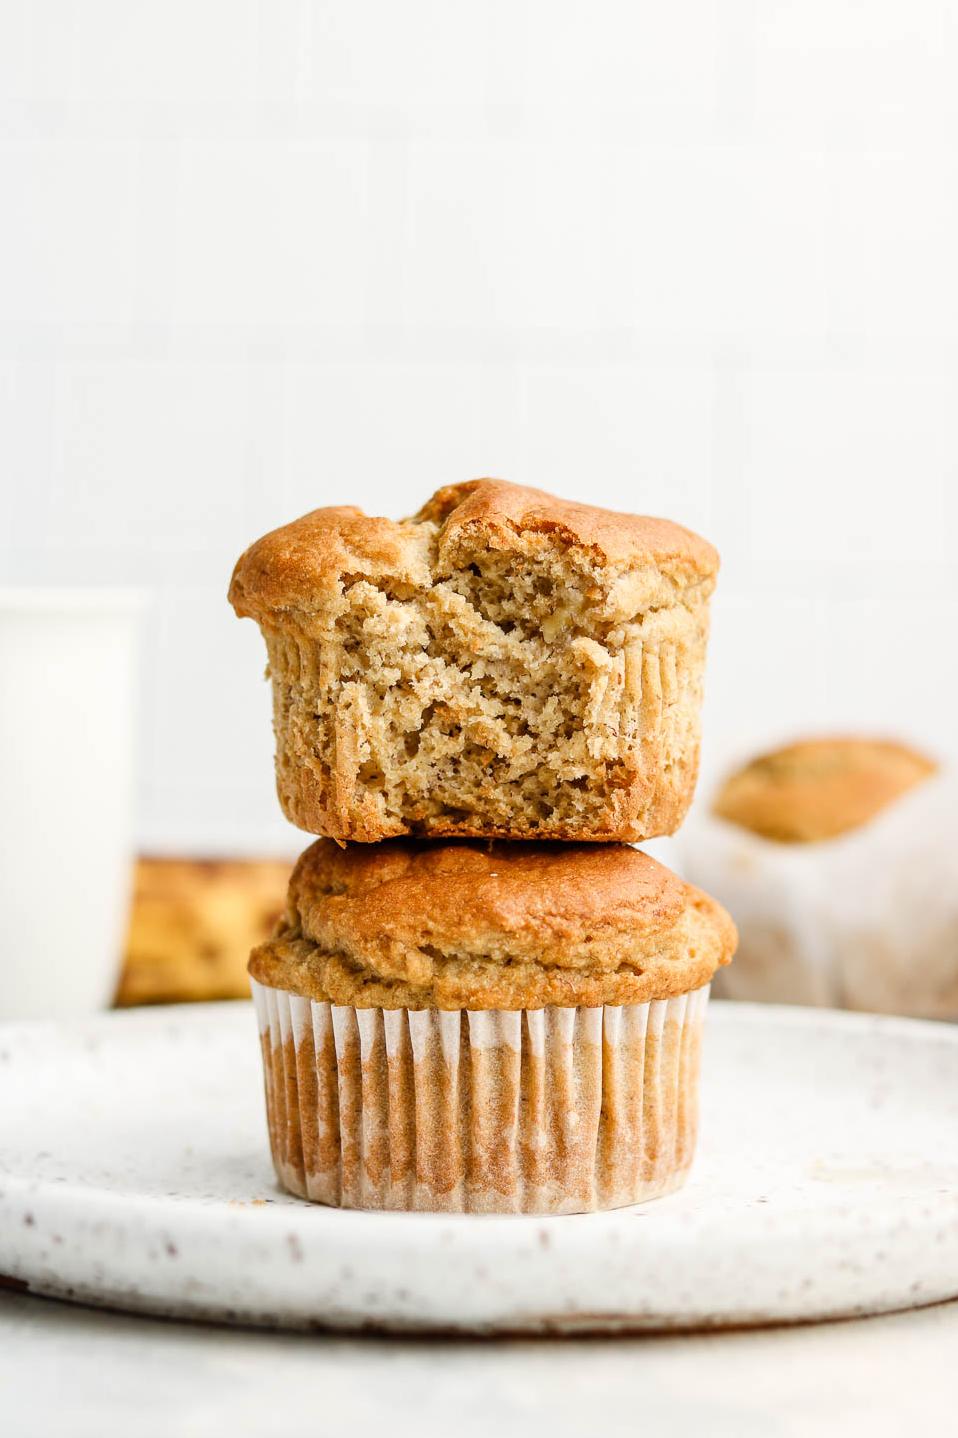  These muffins are bursting with banana goodness.